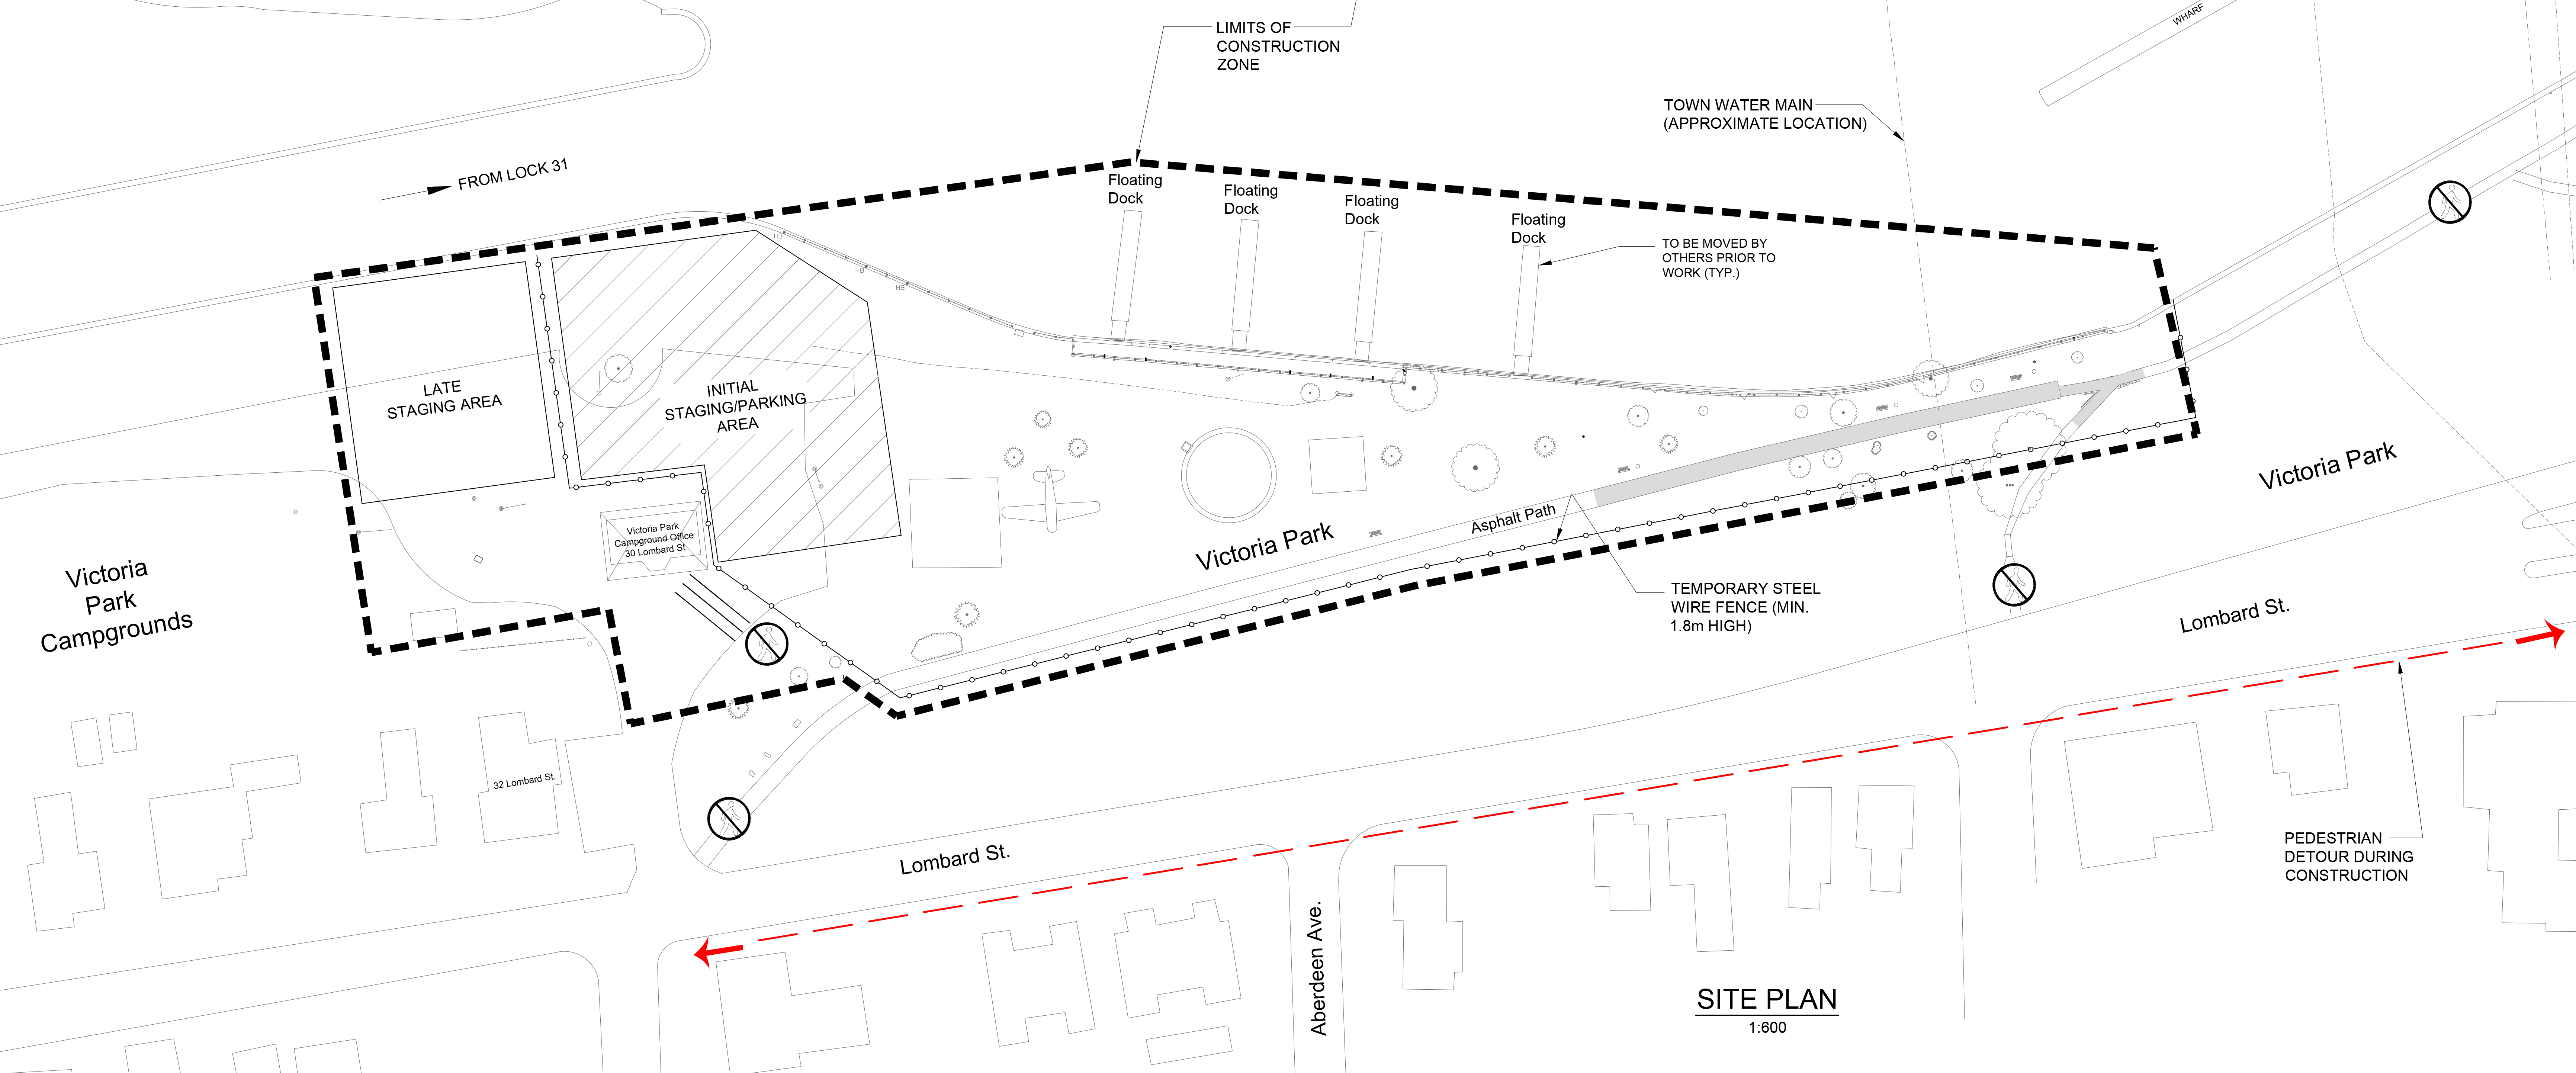 Map showing Victoria Park between Abel St. and Lavinia St. fenced to allow for construction staging and safety. Paths are re-routed to the south side of Lombard St. 